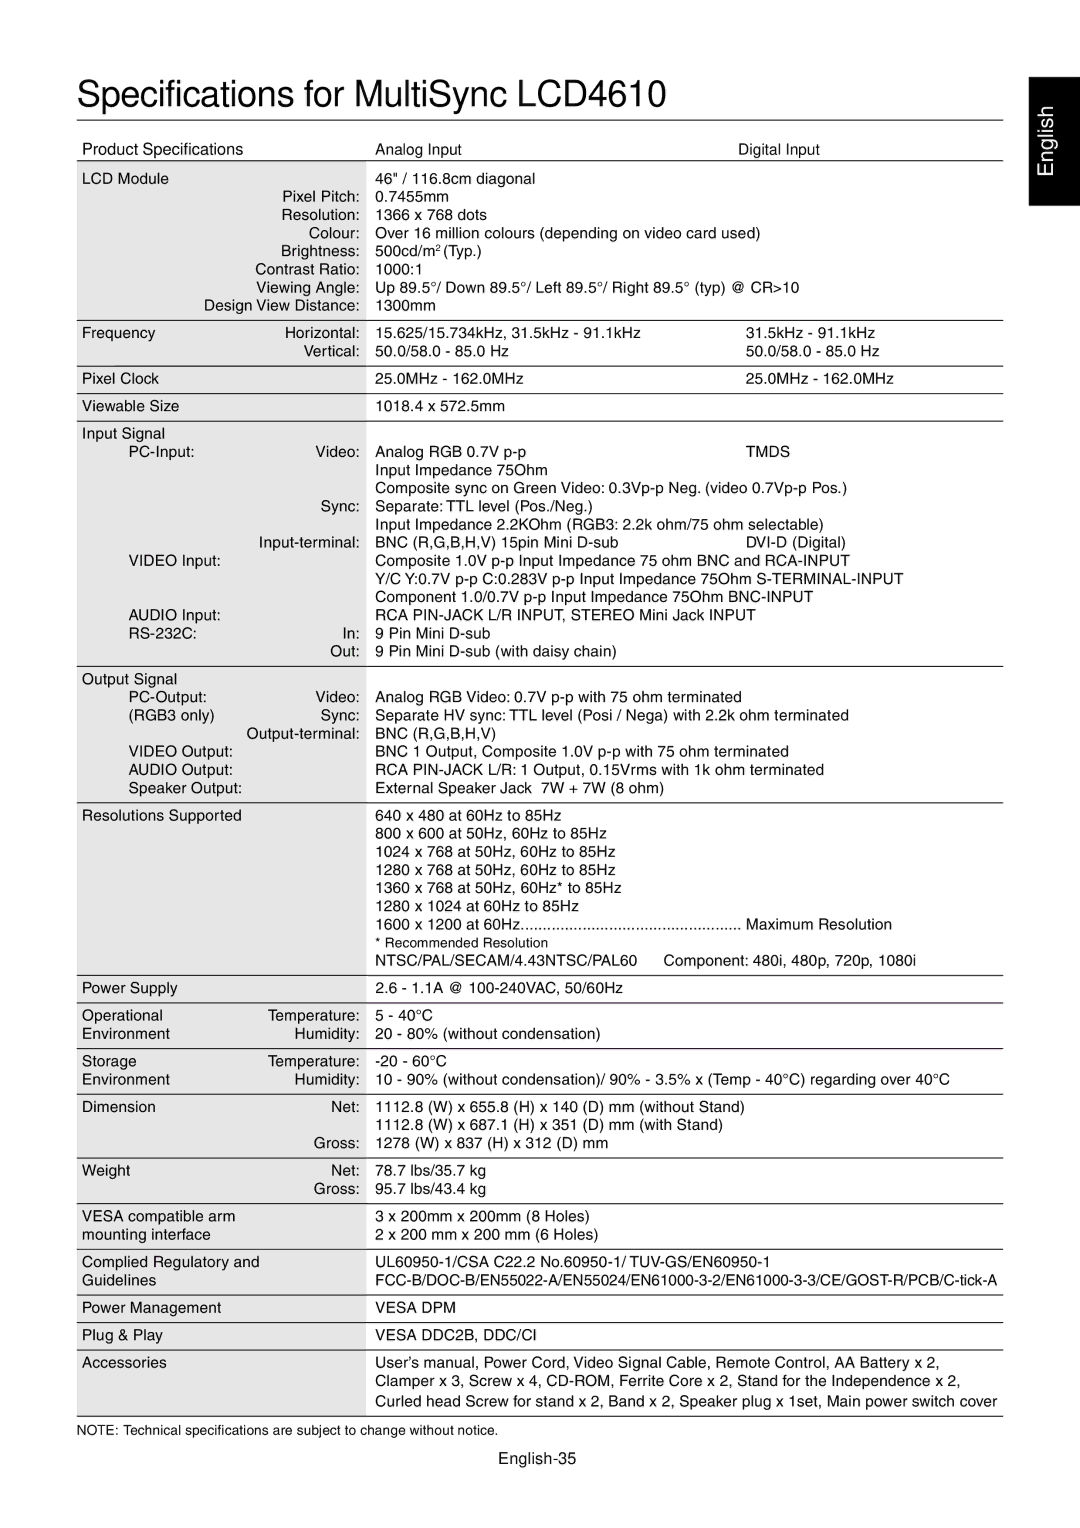 NEC LCD4010, LCD4610, LCD4610, LCD4610 user manual Specifications for MultiSync LCD4610, English-35 